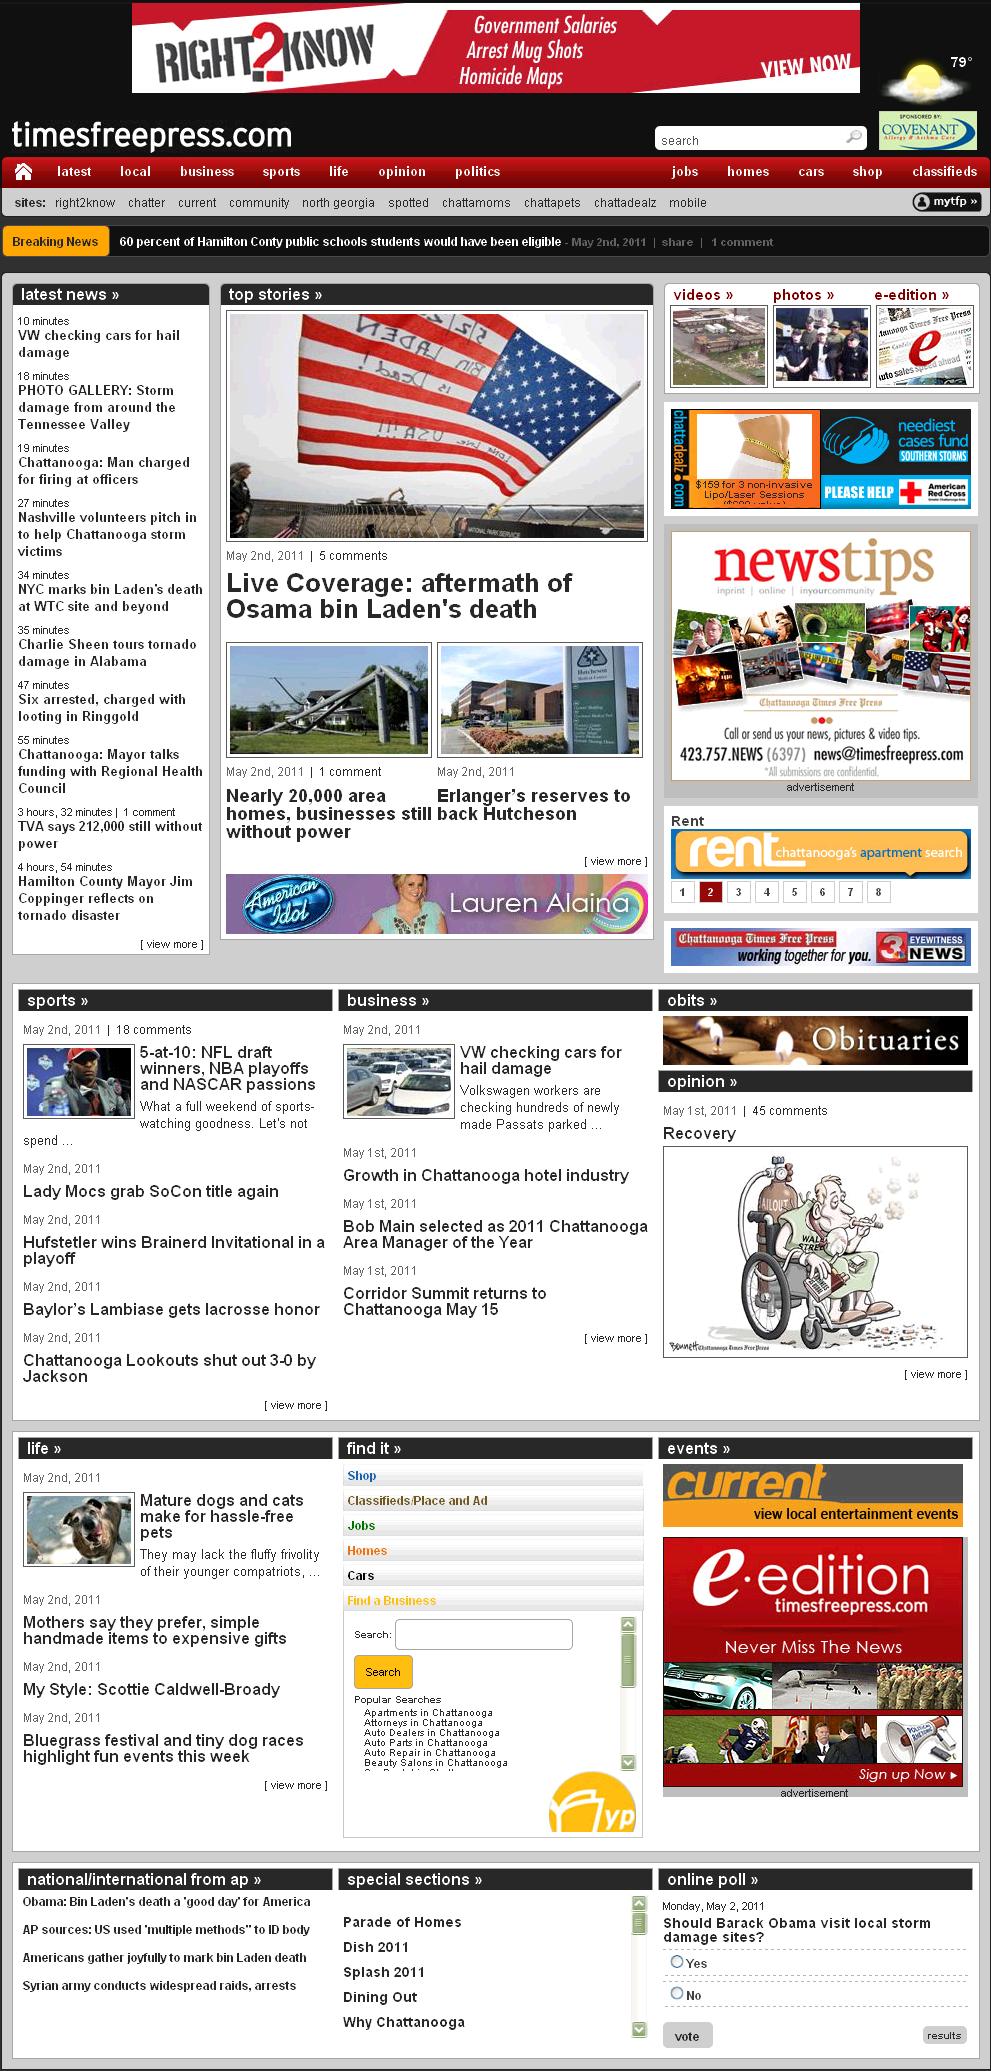 Digital Advertising The Chattanooga Times Free Press website and mobile editions have evolved into a true online experience, allowing the user to interact and immerse themselves in Breaking News